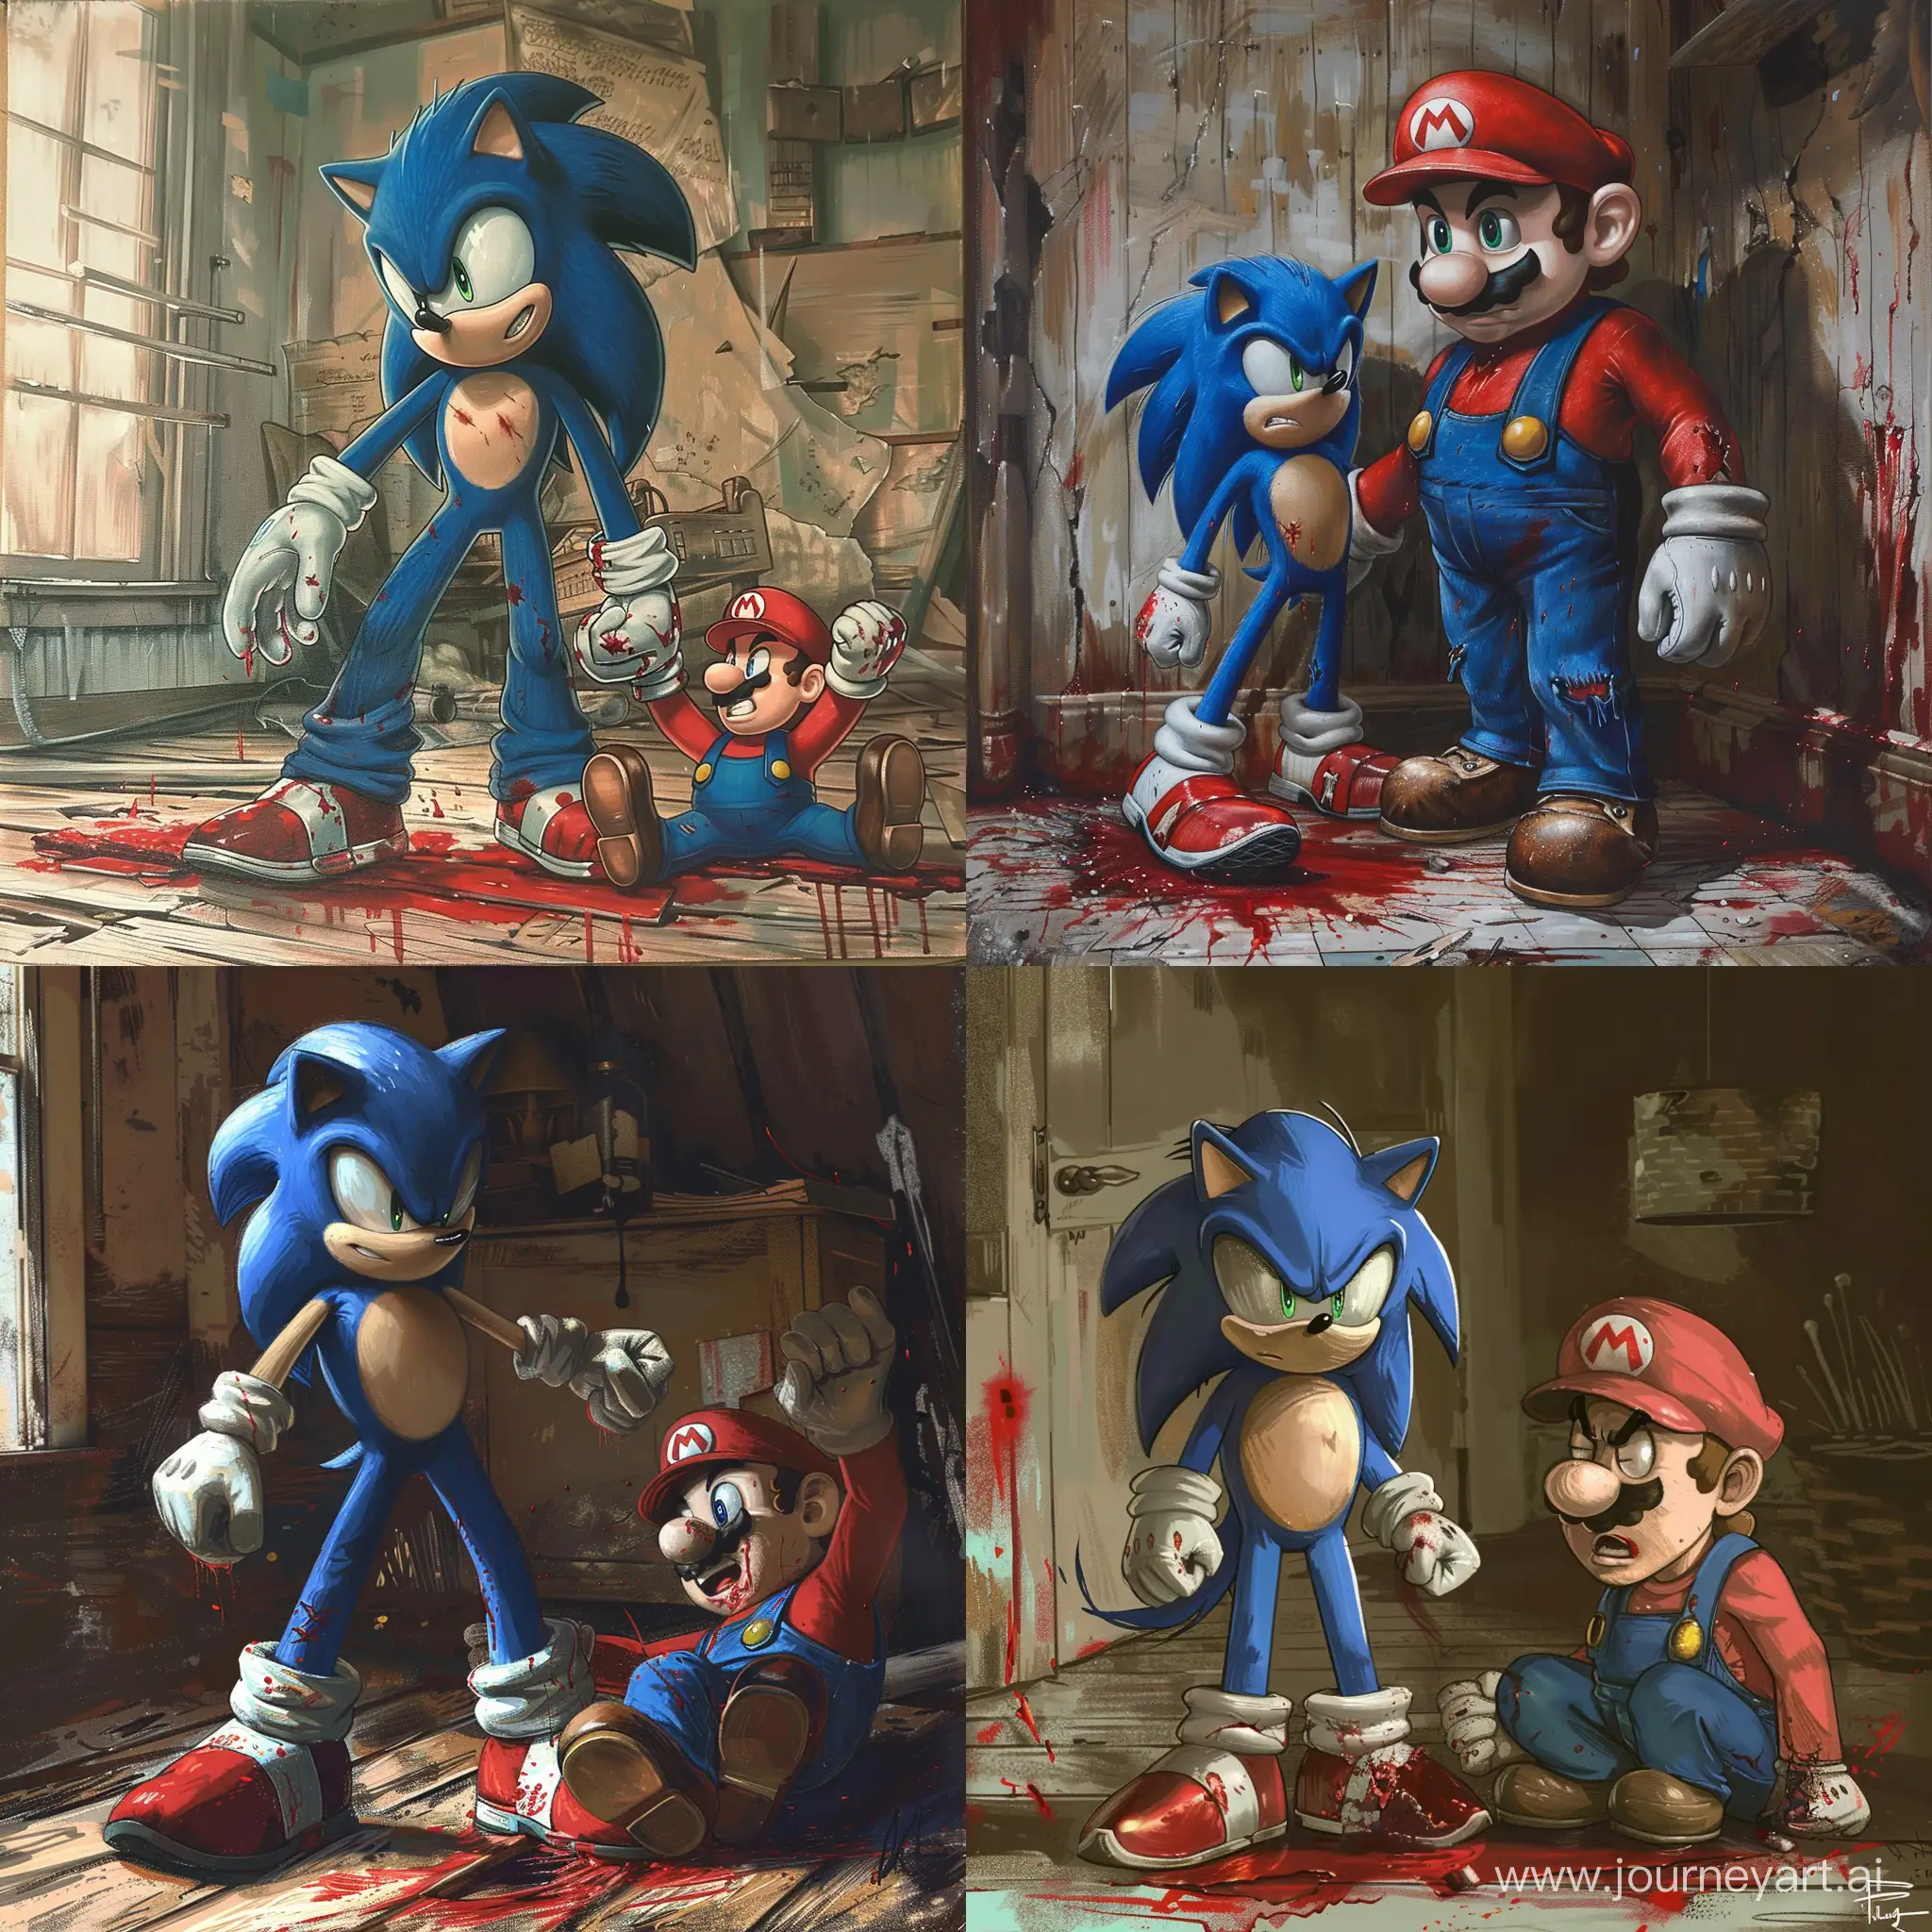 Sonic-Victorious-Over-Mario-in-Intense-Gaming-Battle